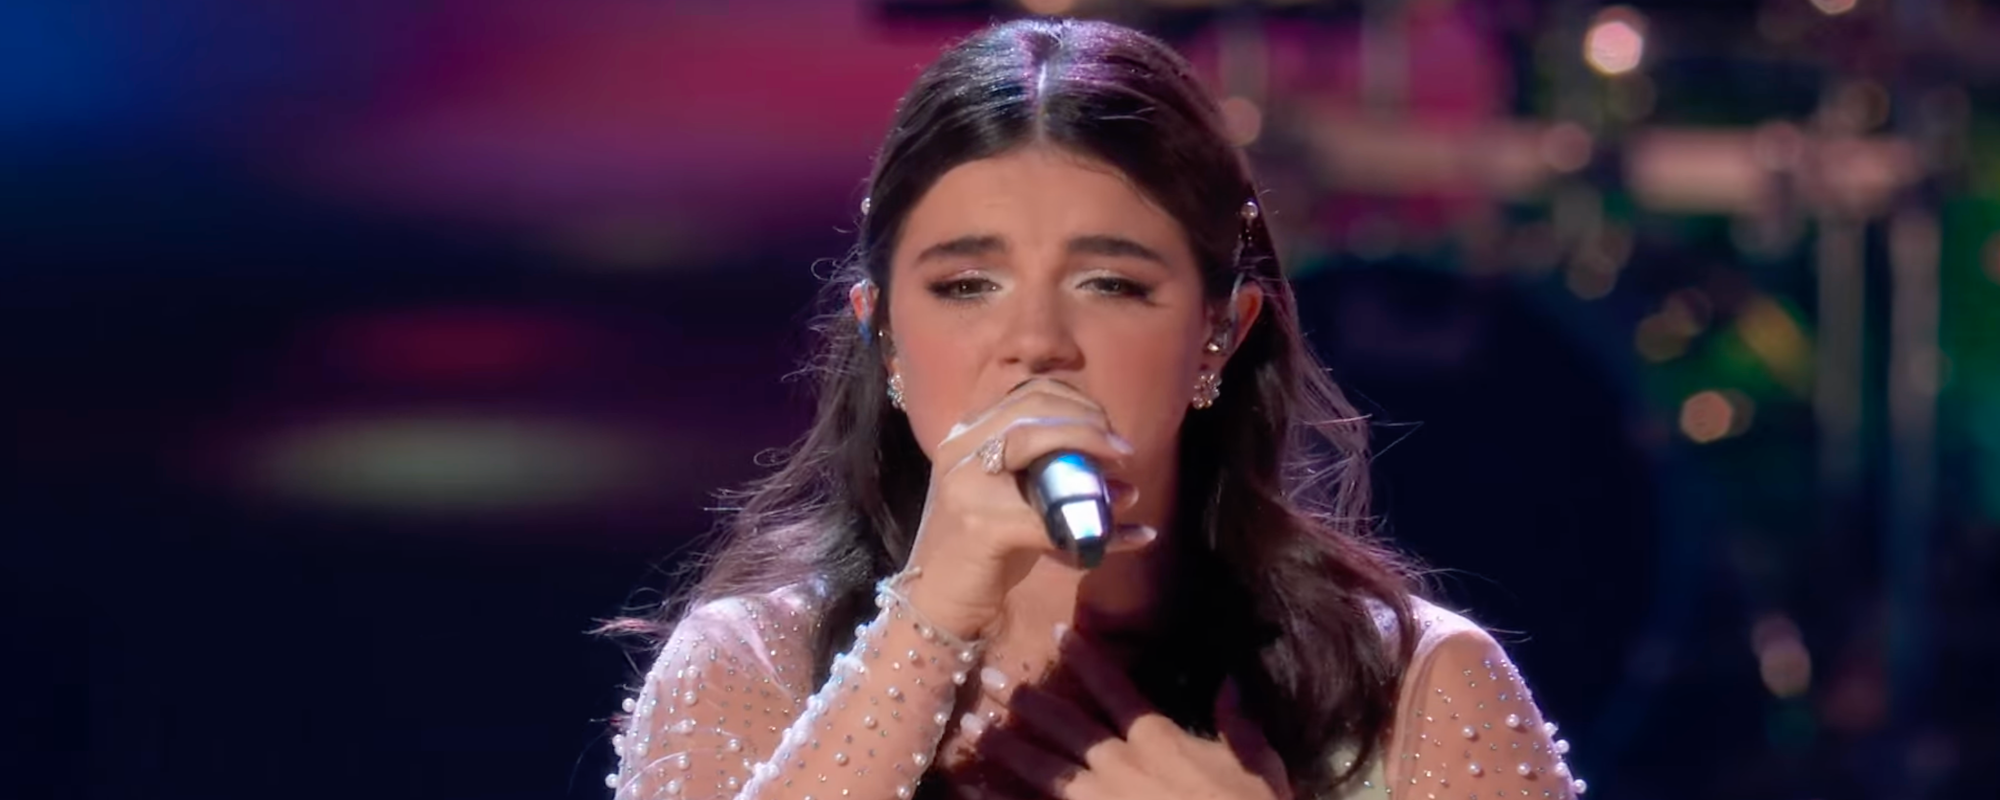 The Voice's Julia Roome Makes Her Stunning Return to Team Niall Thanks